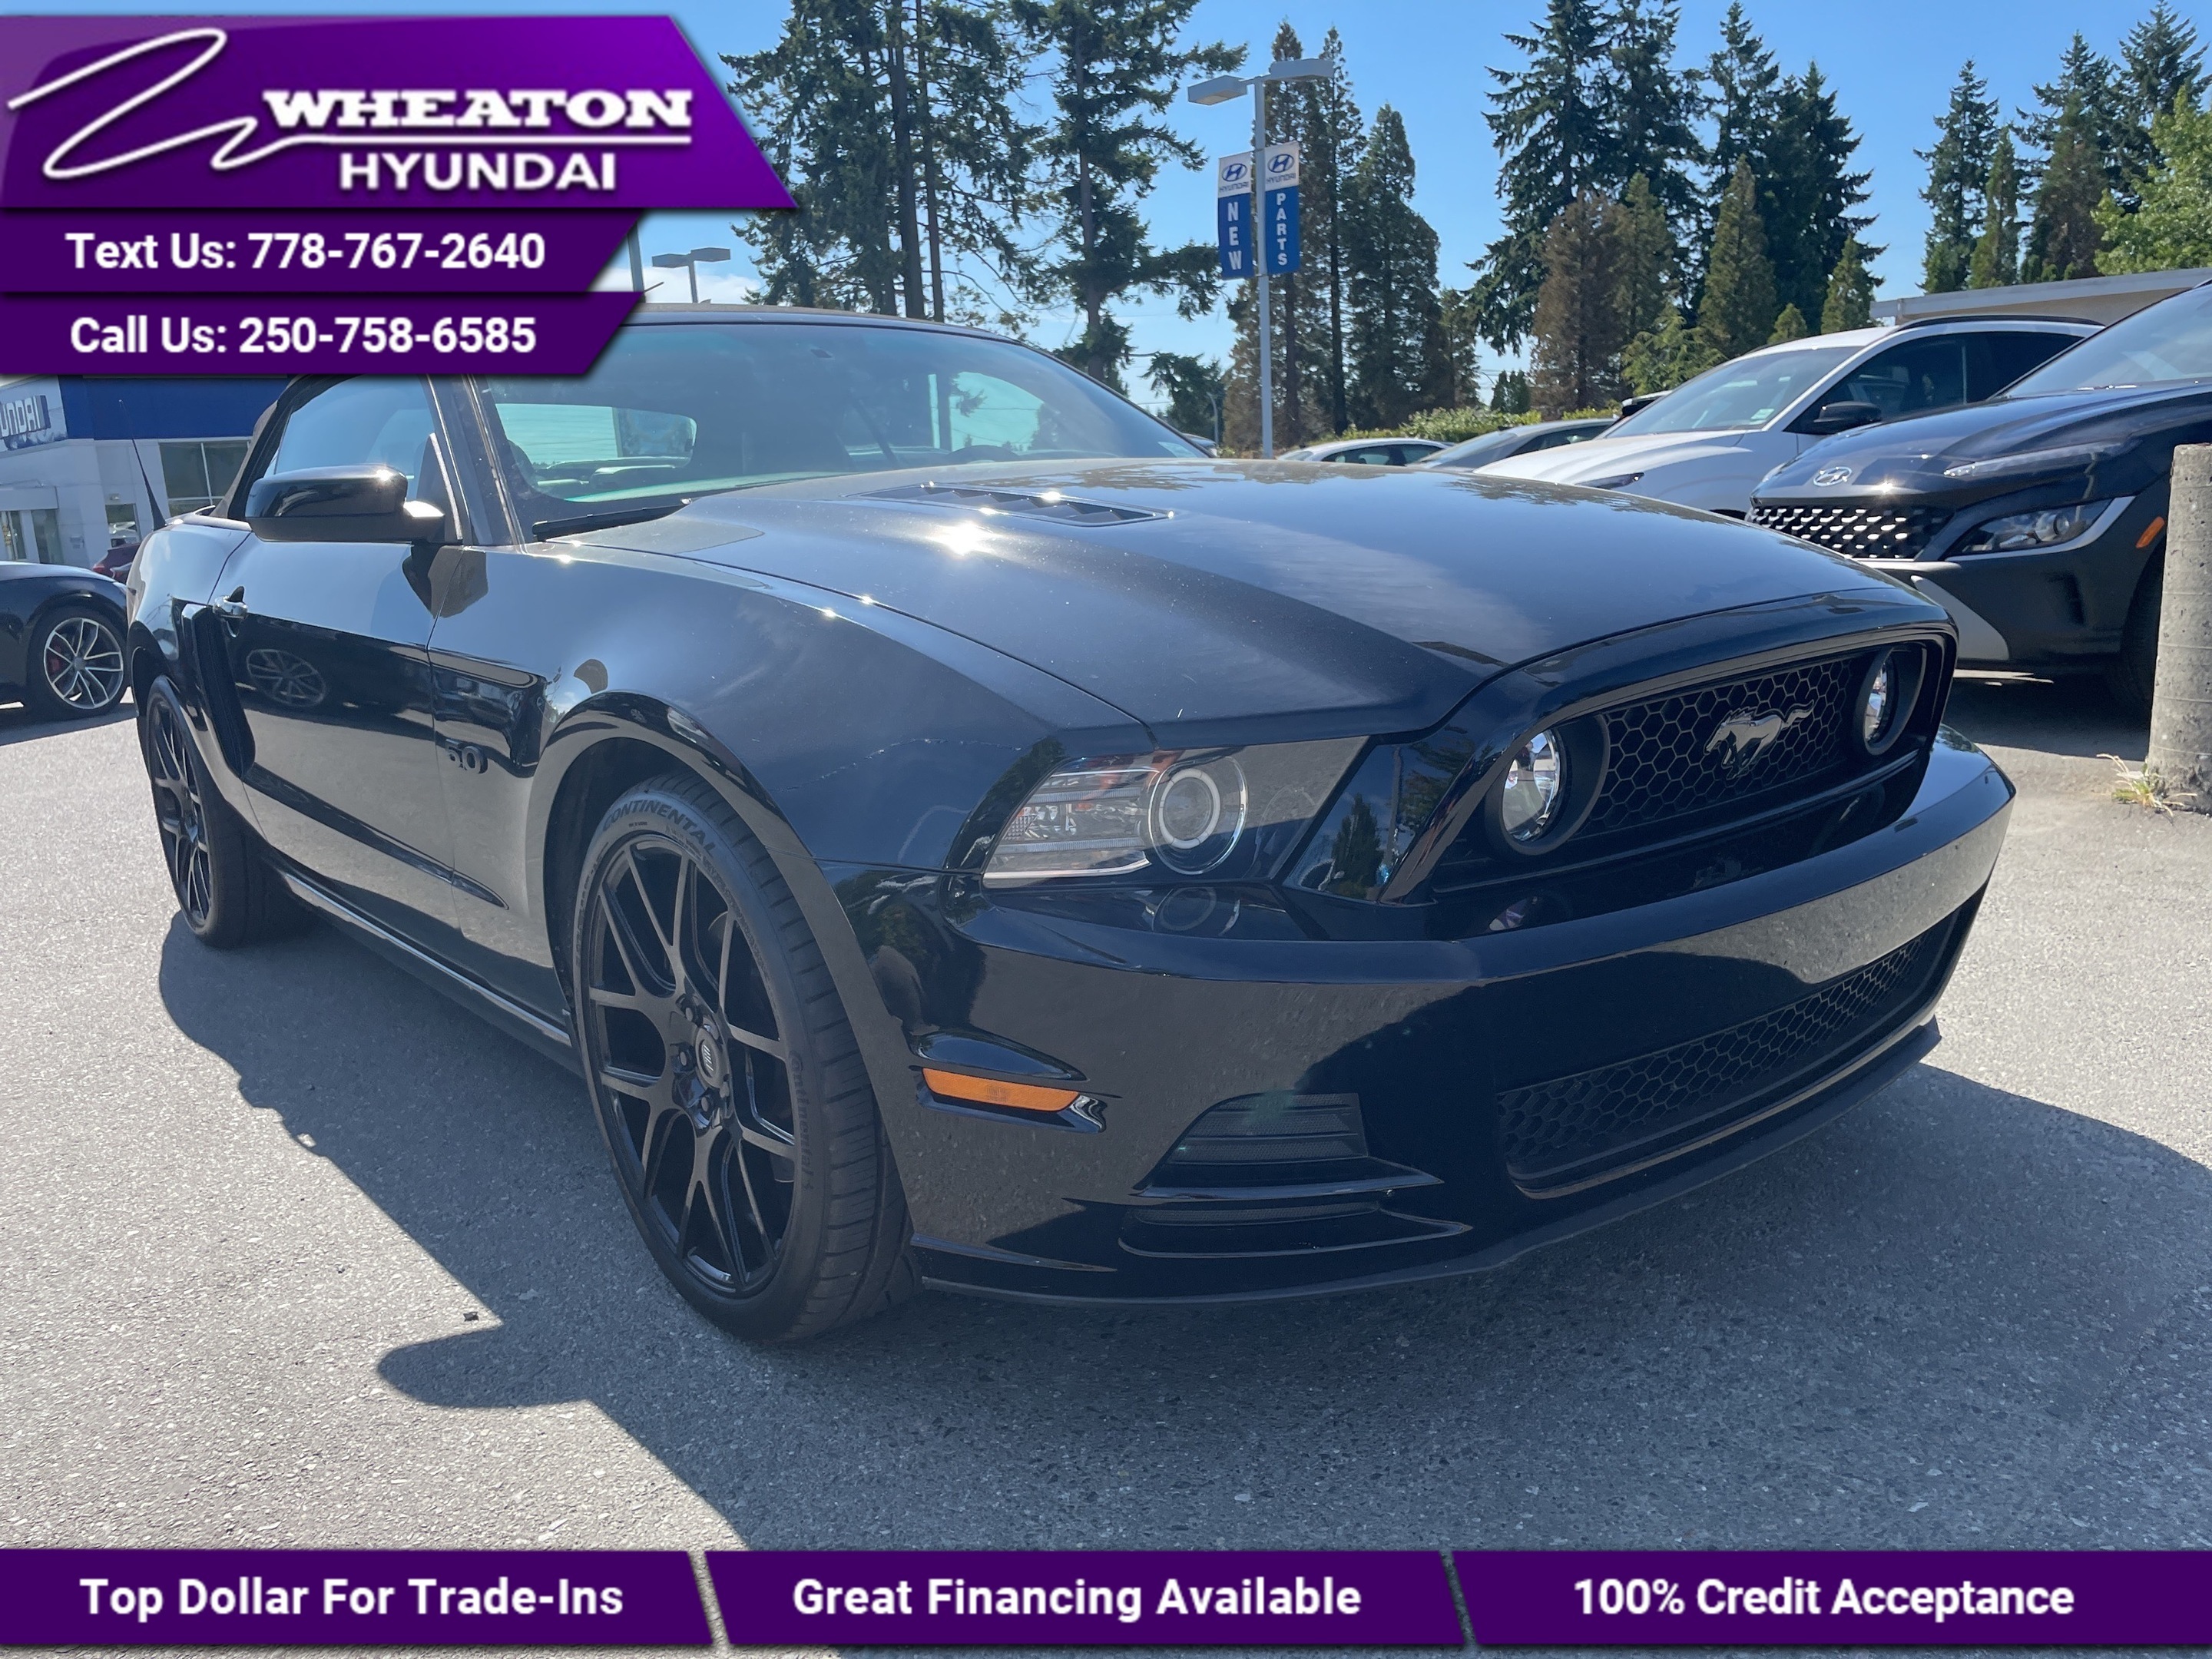 2014 Ford Mustang GT, Trade in, Leather, Heated Seats, Bluetooth, Al